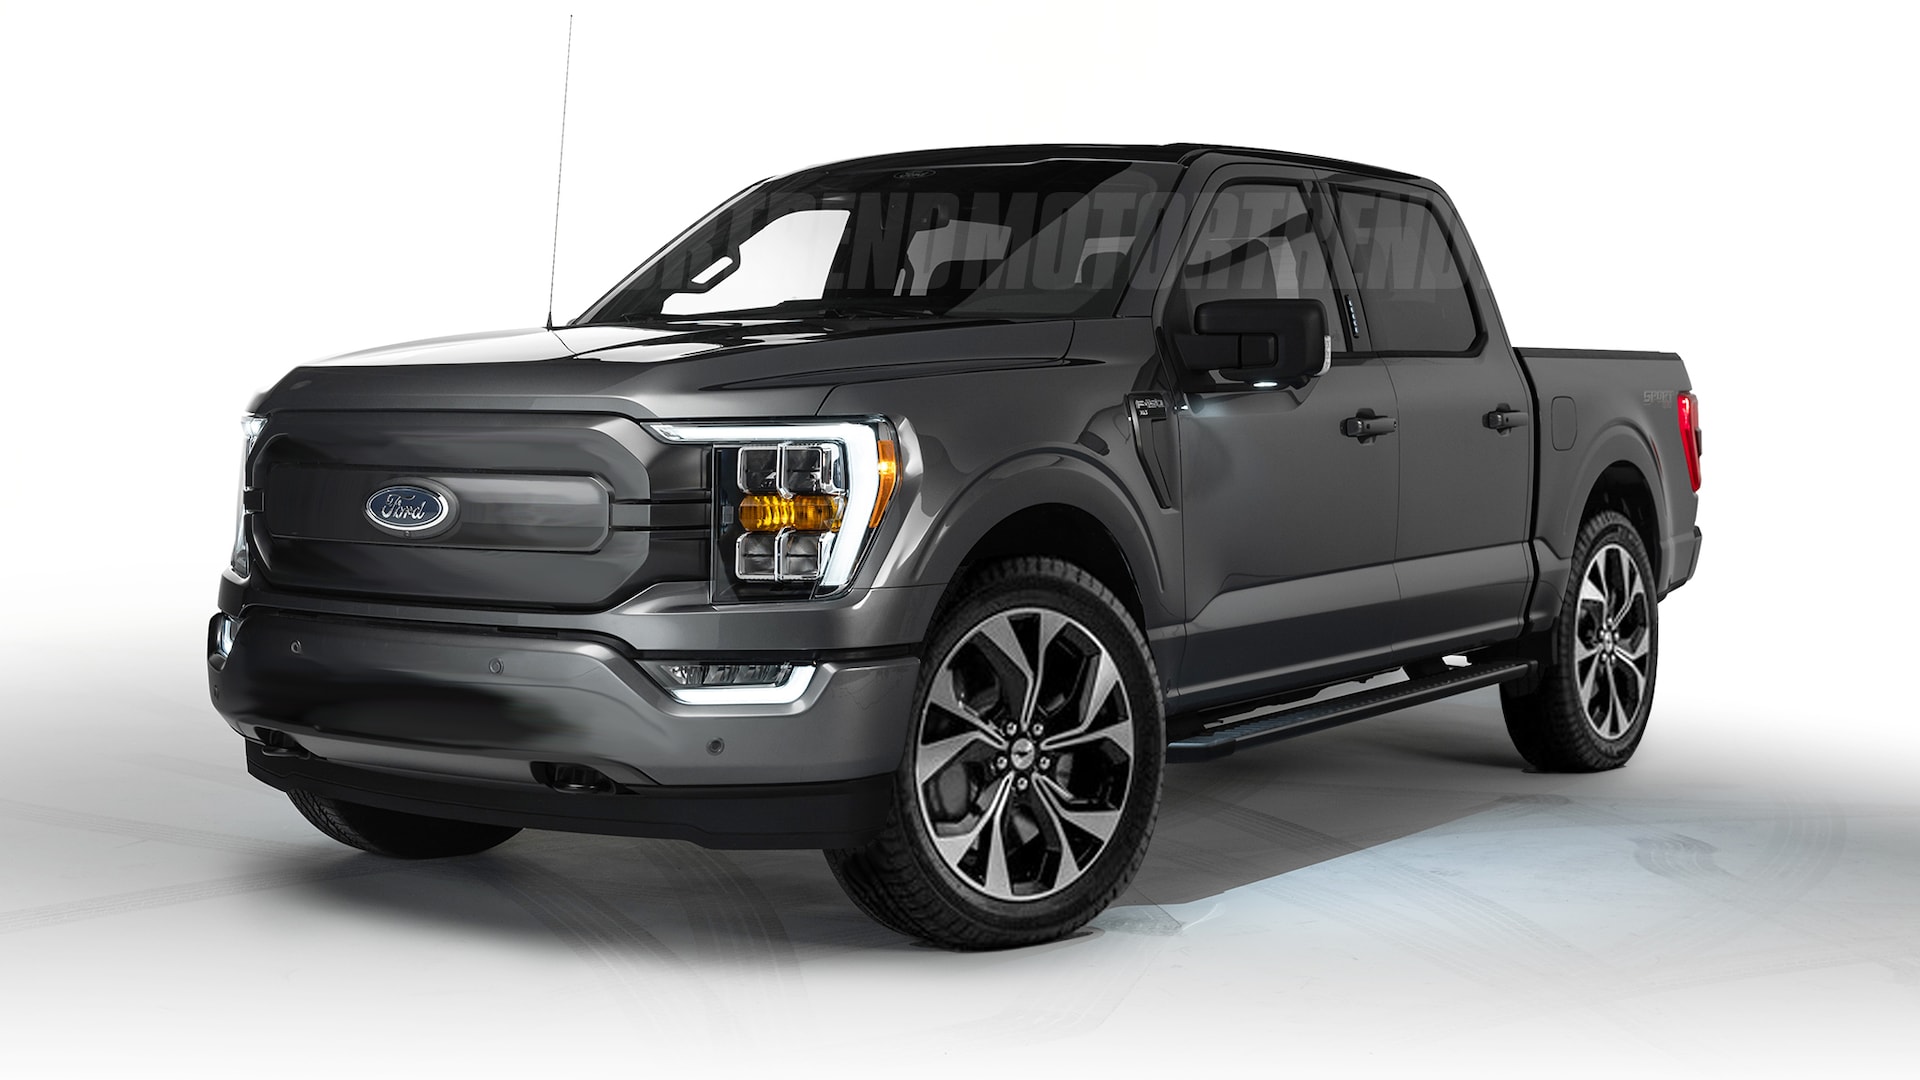 2022 Ford F-150 Electric: What We Know